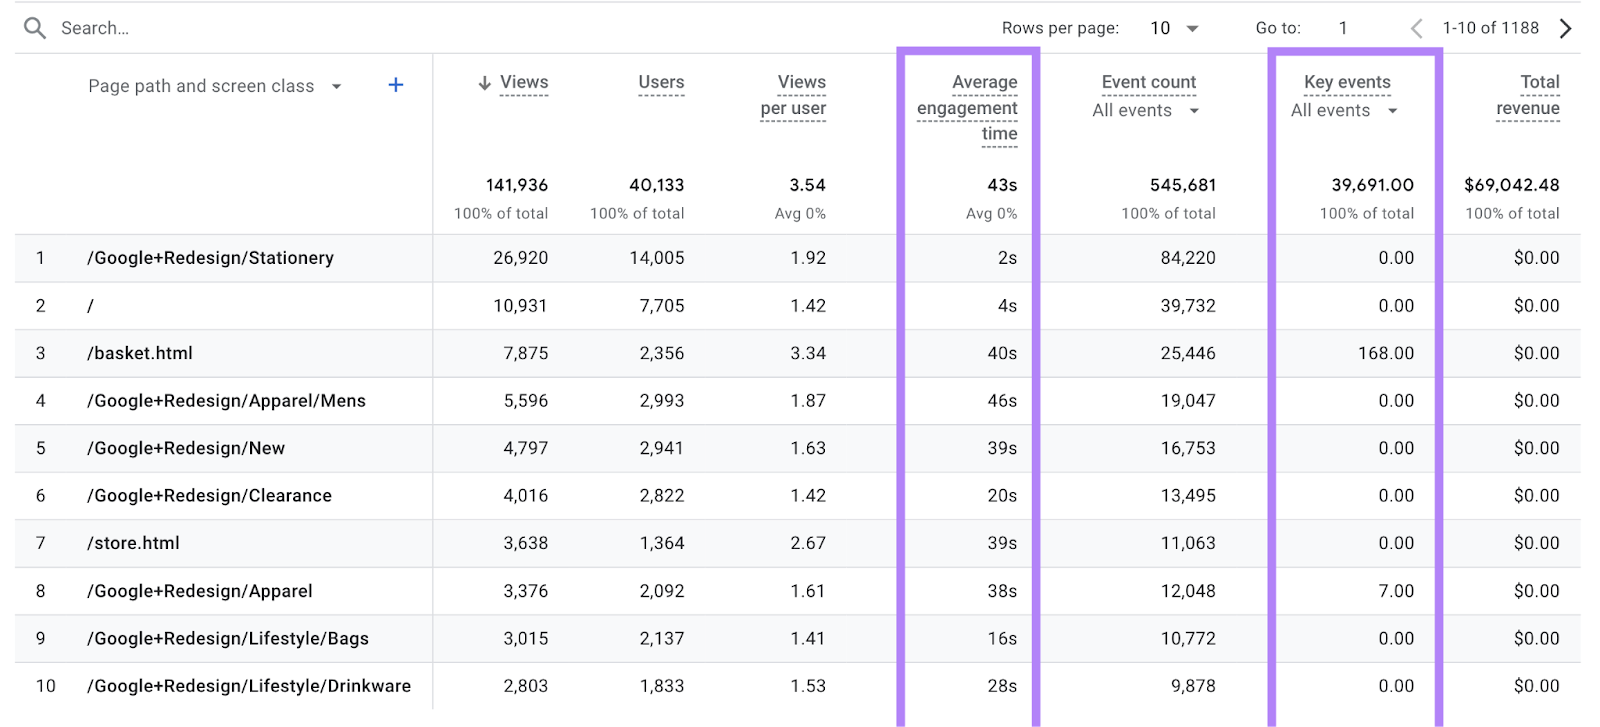 Google Analytics pages and screens report, highlighting average engagement time and key events.